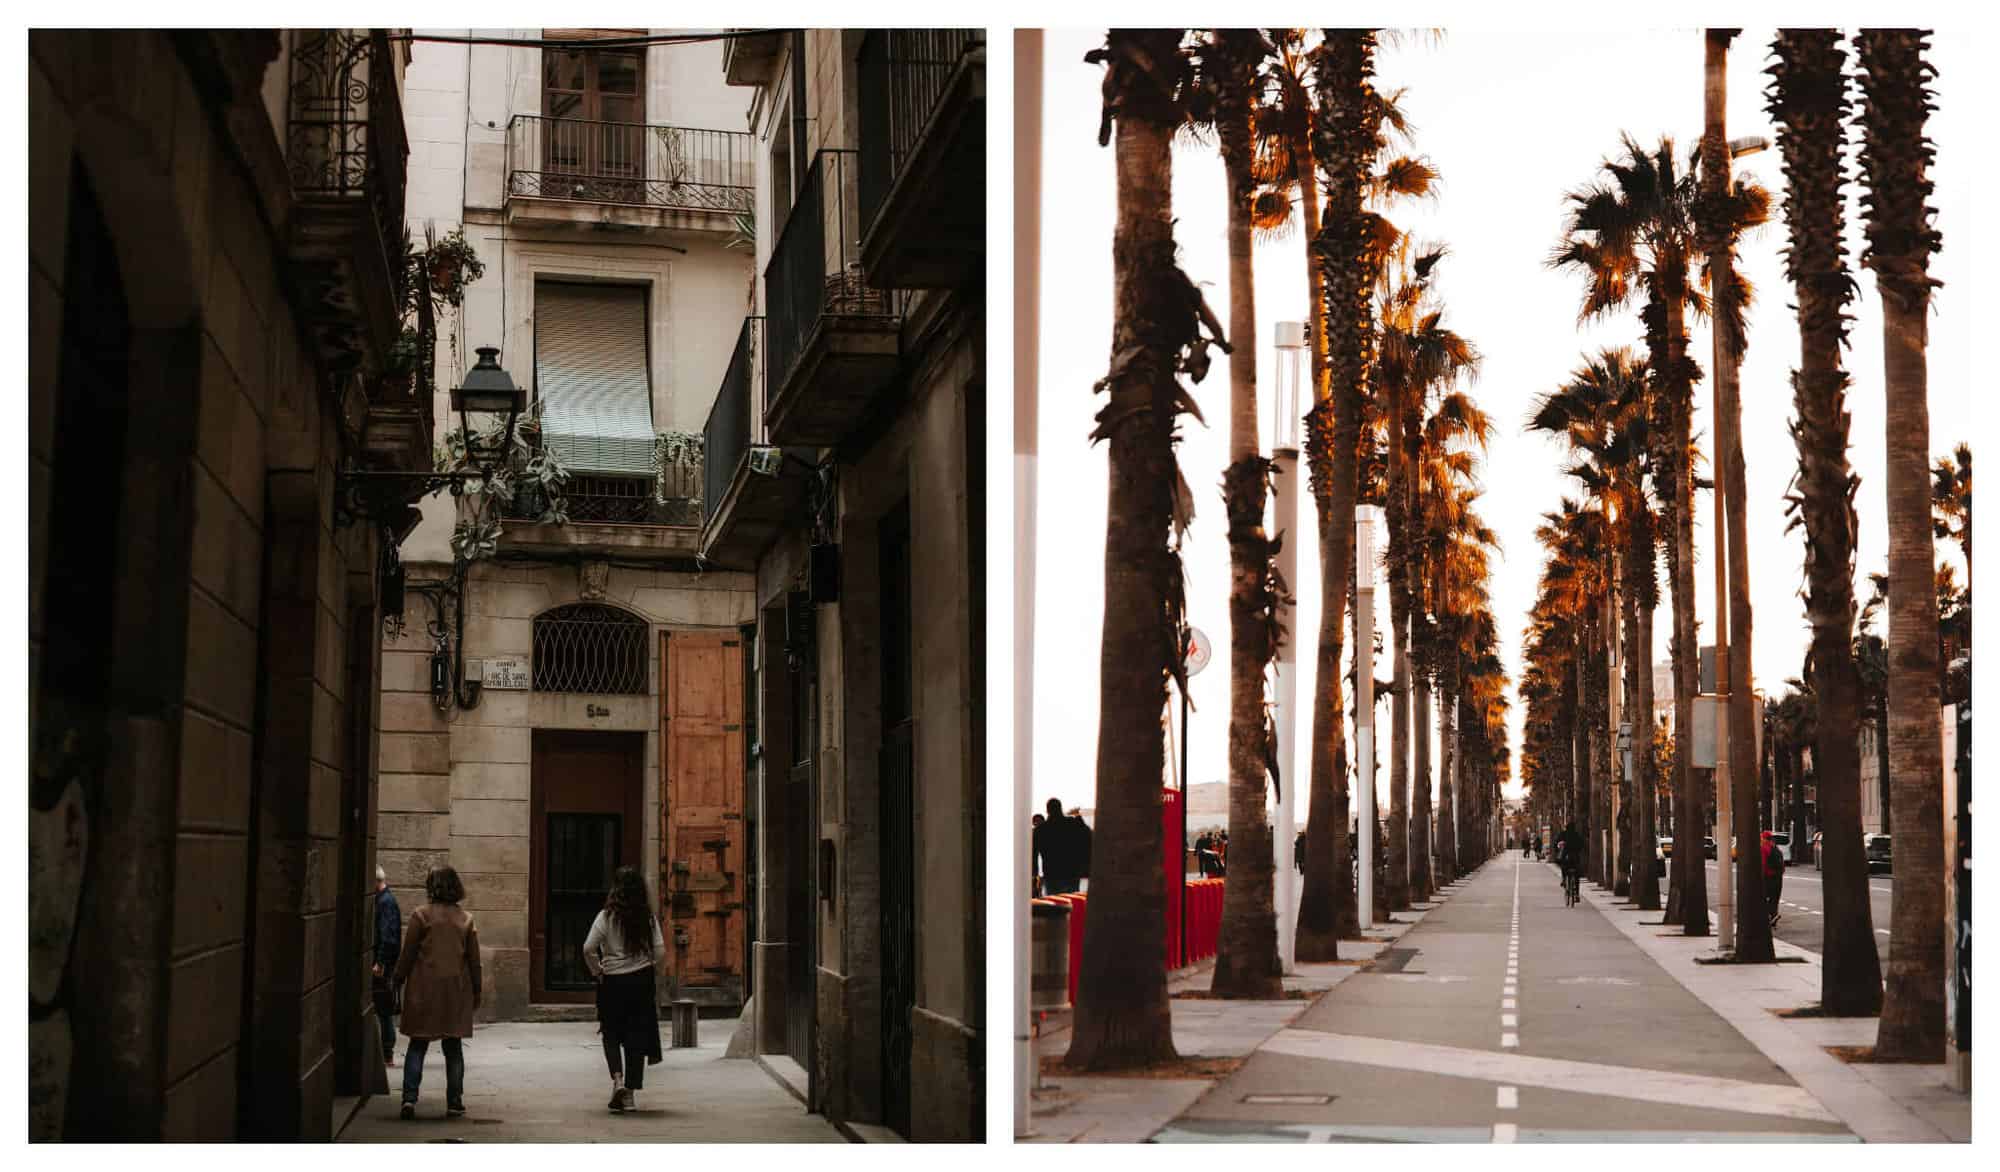 Left: A woman with long black hair walks through a narrow street in Barcelona. Right: A cycling path lined with palm trees during a Barcelona sunset.